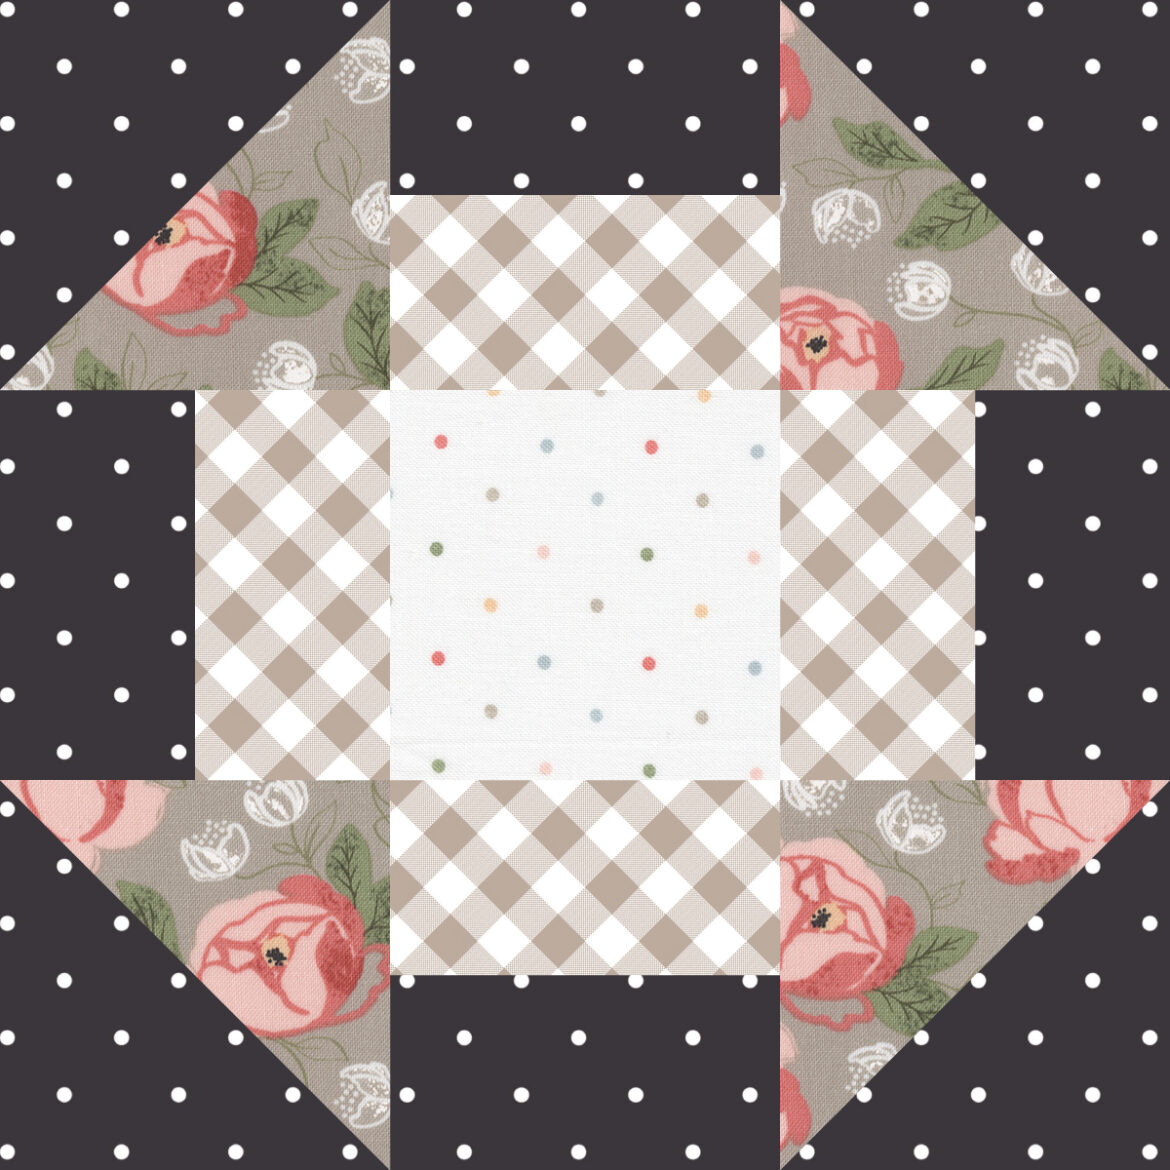 Sewcialites 2 free block od the week. Block 14 is "Enchant" by April Rosenthal. Fabric is Country Rose by Lella Boutique for Moda. Get the free block pattern here.